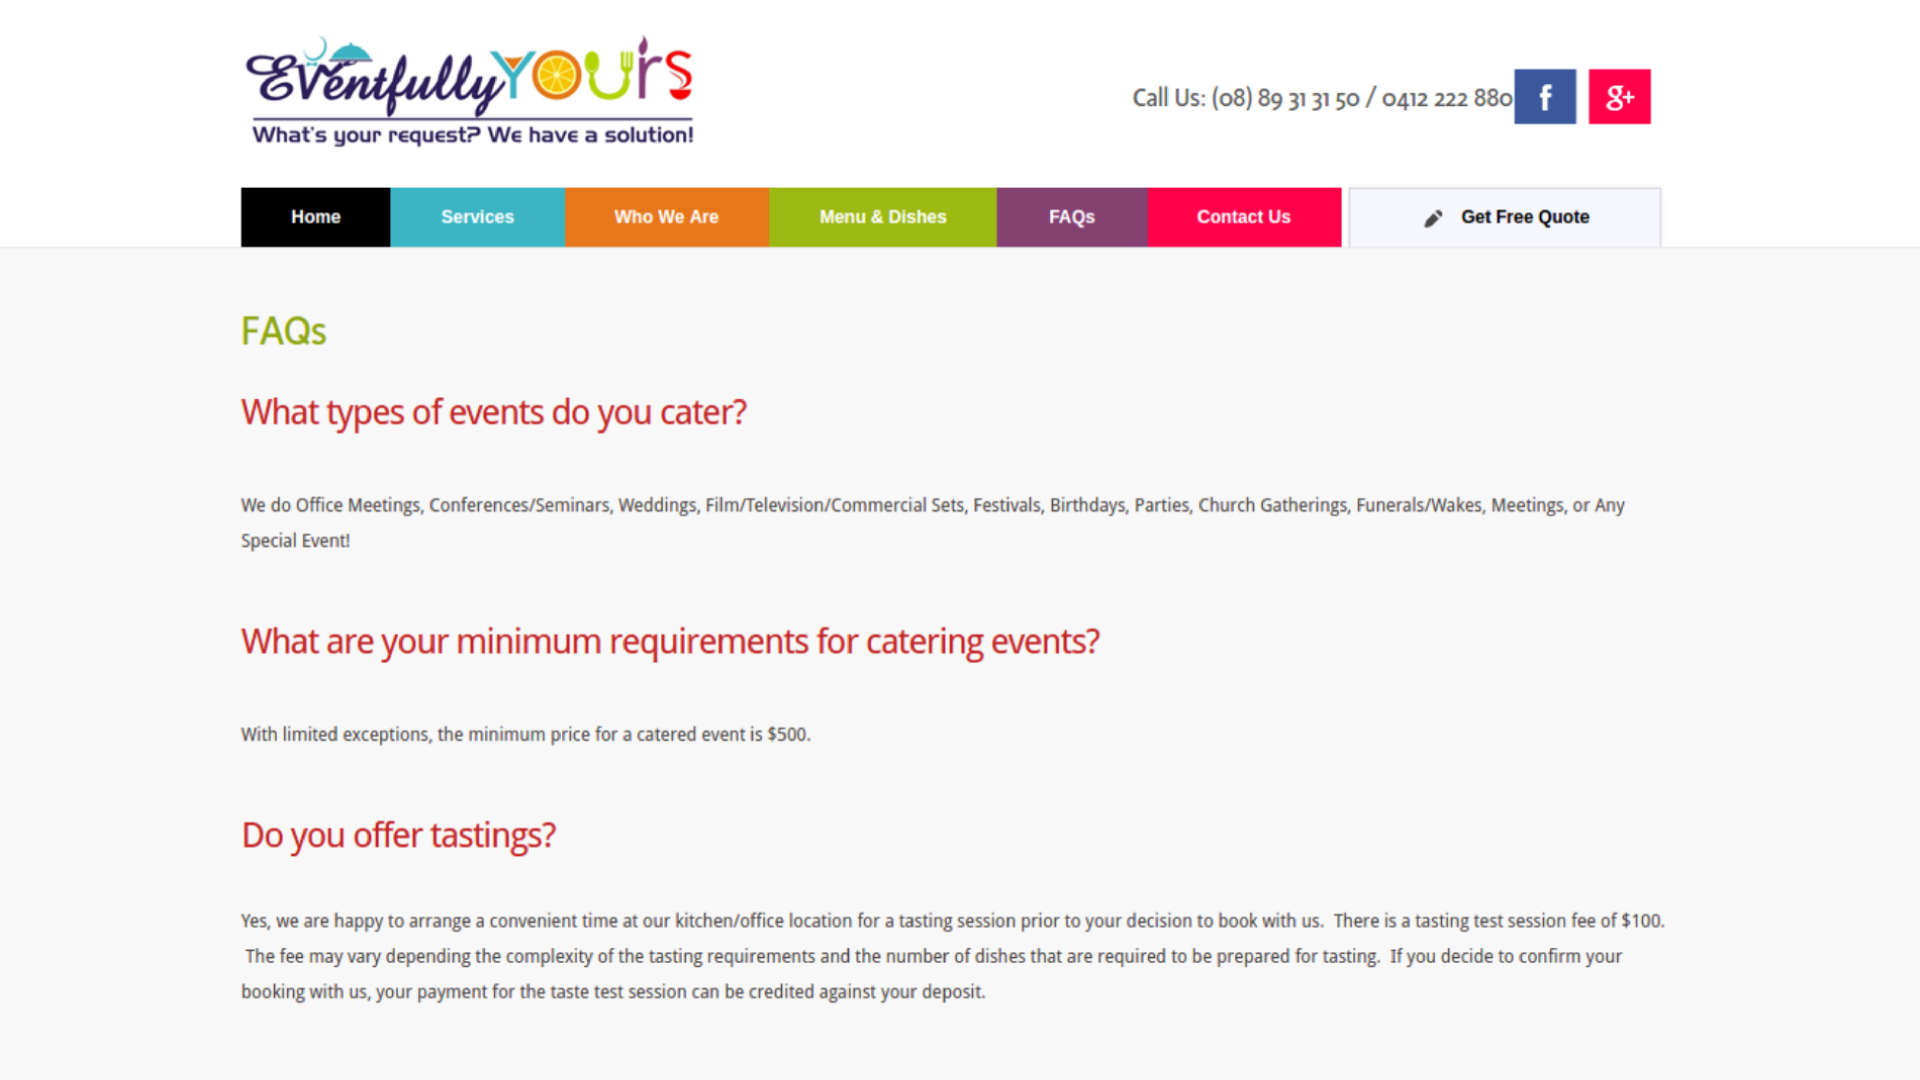 eventfullyyours-4.png